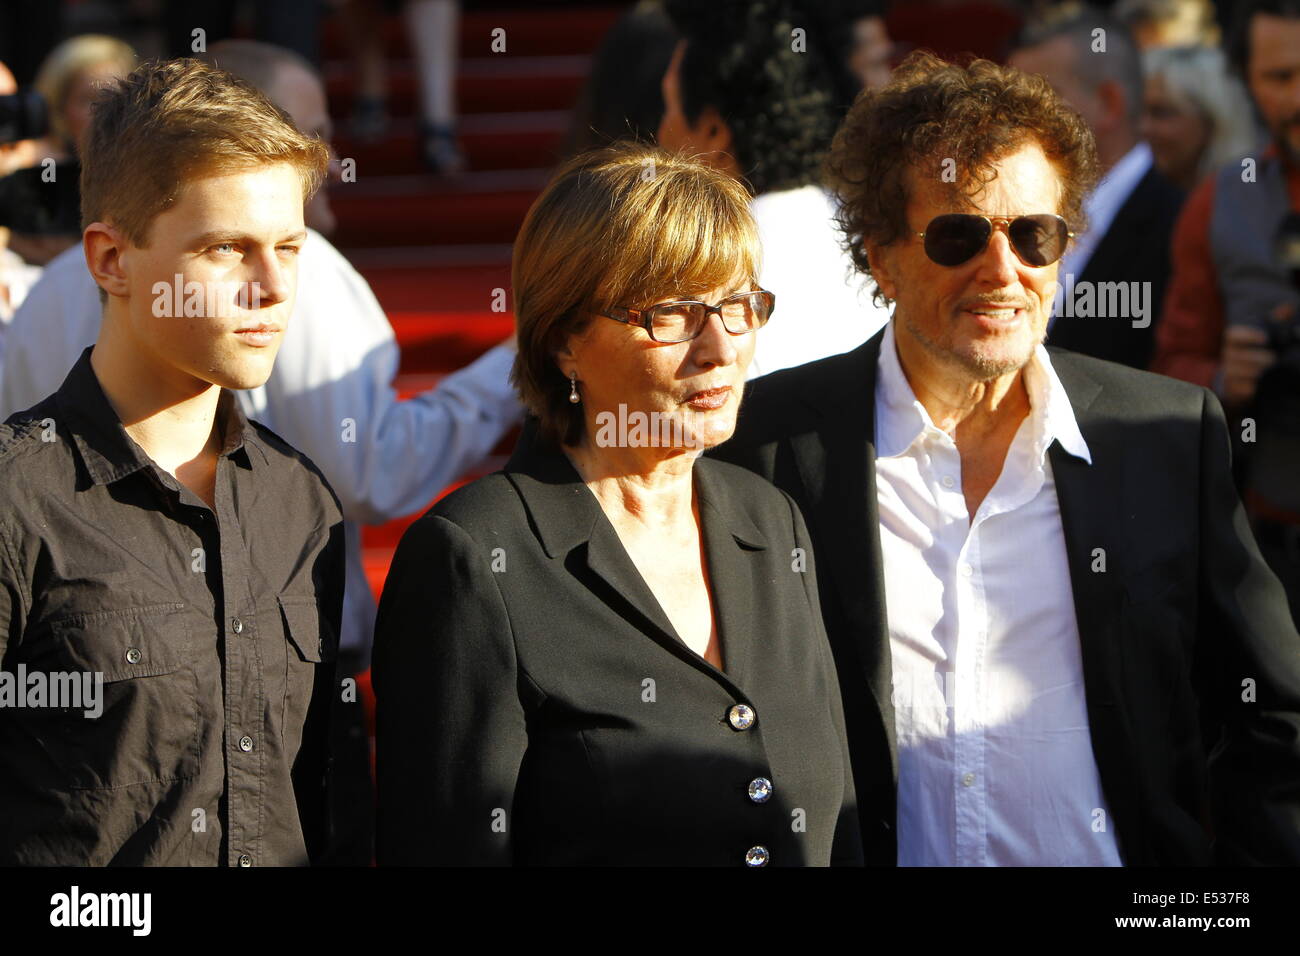 Worms, Germany. 18th July 2014. Dieter Wedel (right), the director of the Nibelungen-Festspiele Worms, poses with his son Benjamin (left)  and his partner Uschi Wolters (right) for the cameras on the red carpet.   Celebrities from politics, sports and film came to Worms, to see the premier of the 13th Nibelungen-Festspiele. The last festival under director Dieter Wedel saw the performance of 'Hebbels Nibelungen - born this way' at the foot of the Cathedral of Worms. Stock Photo